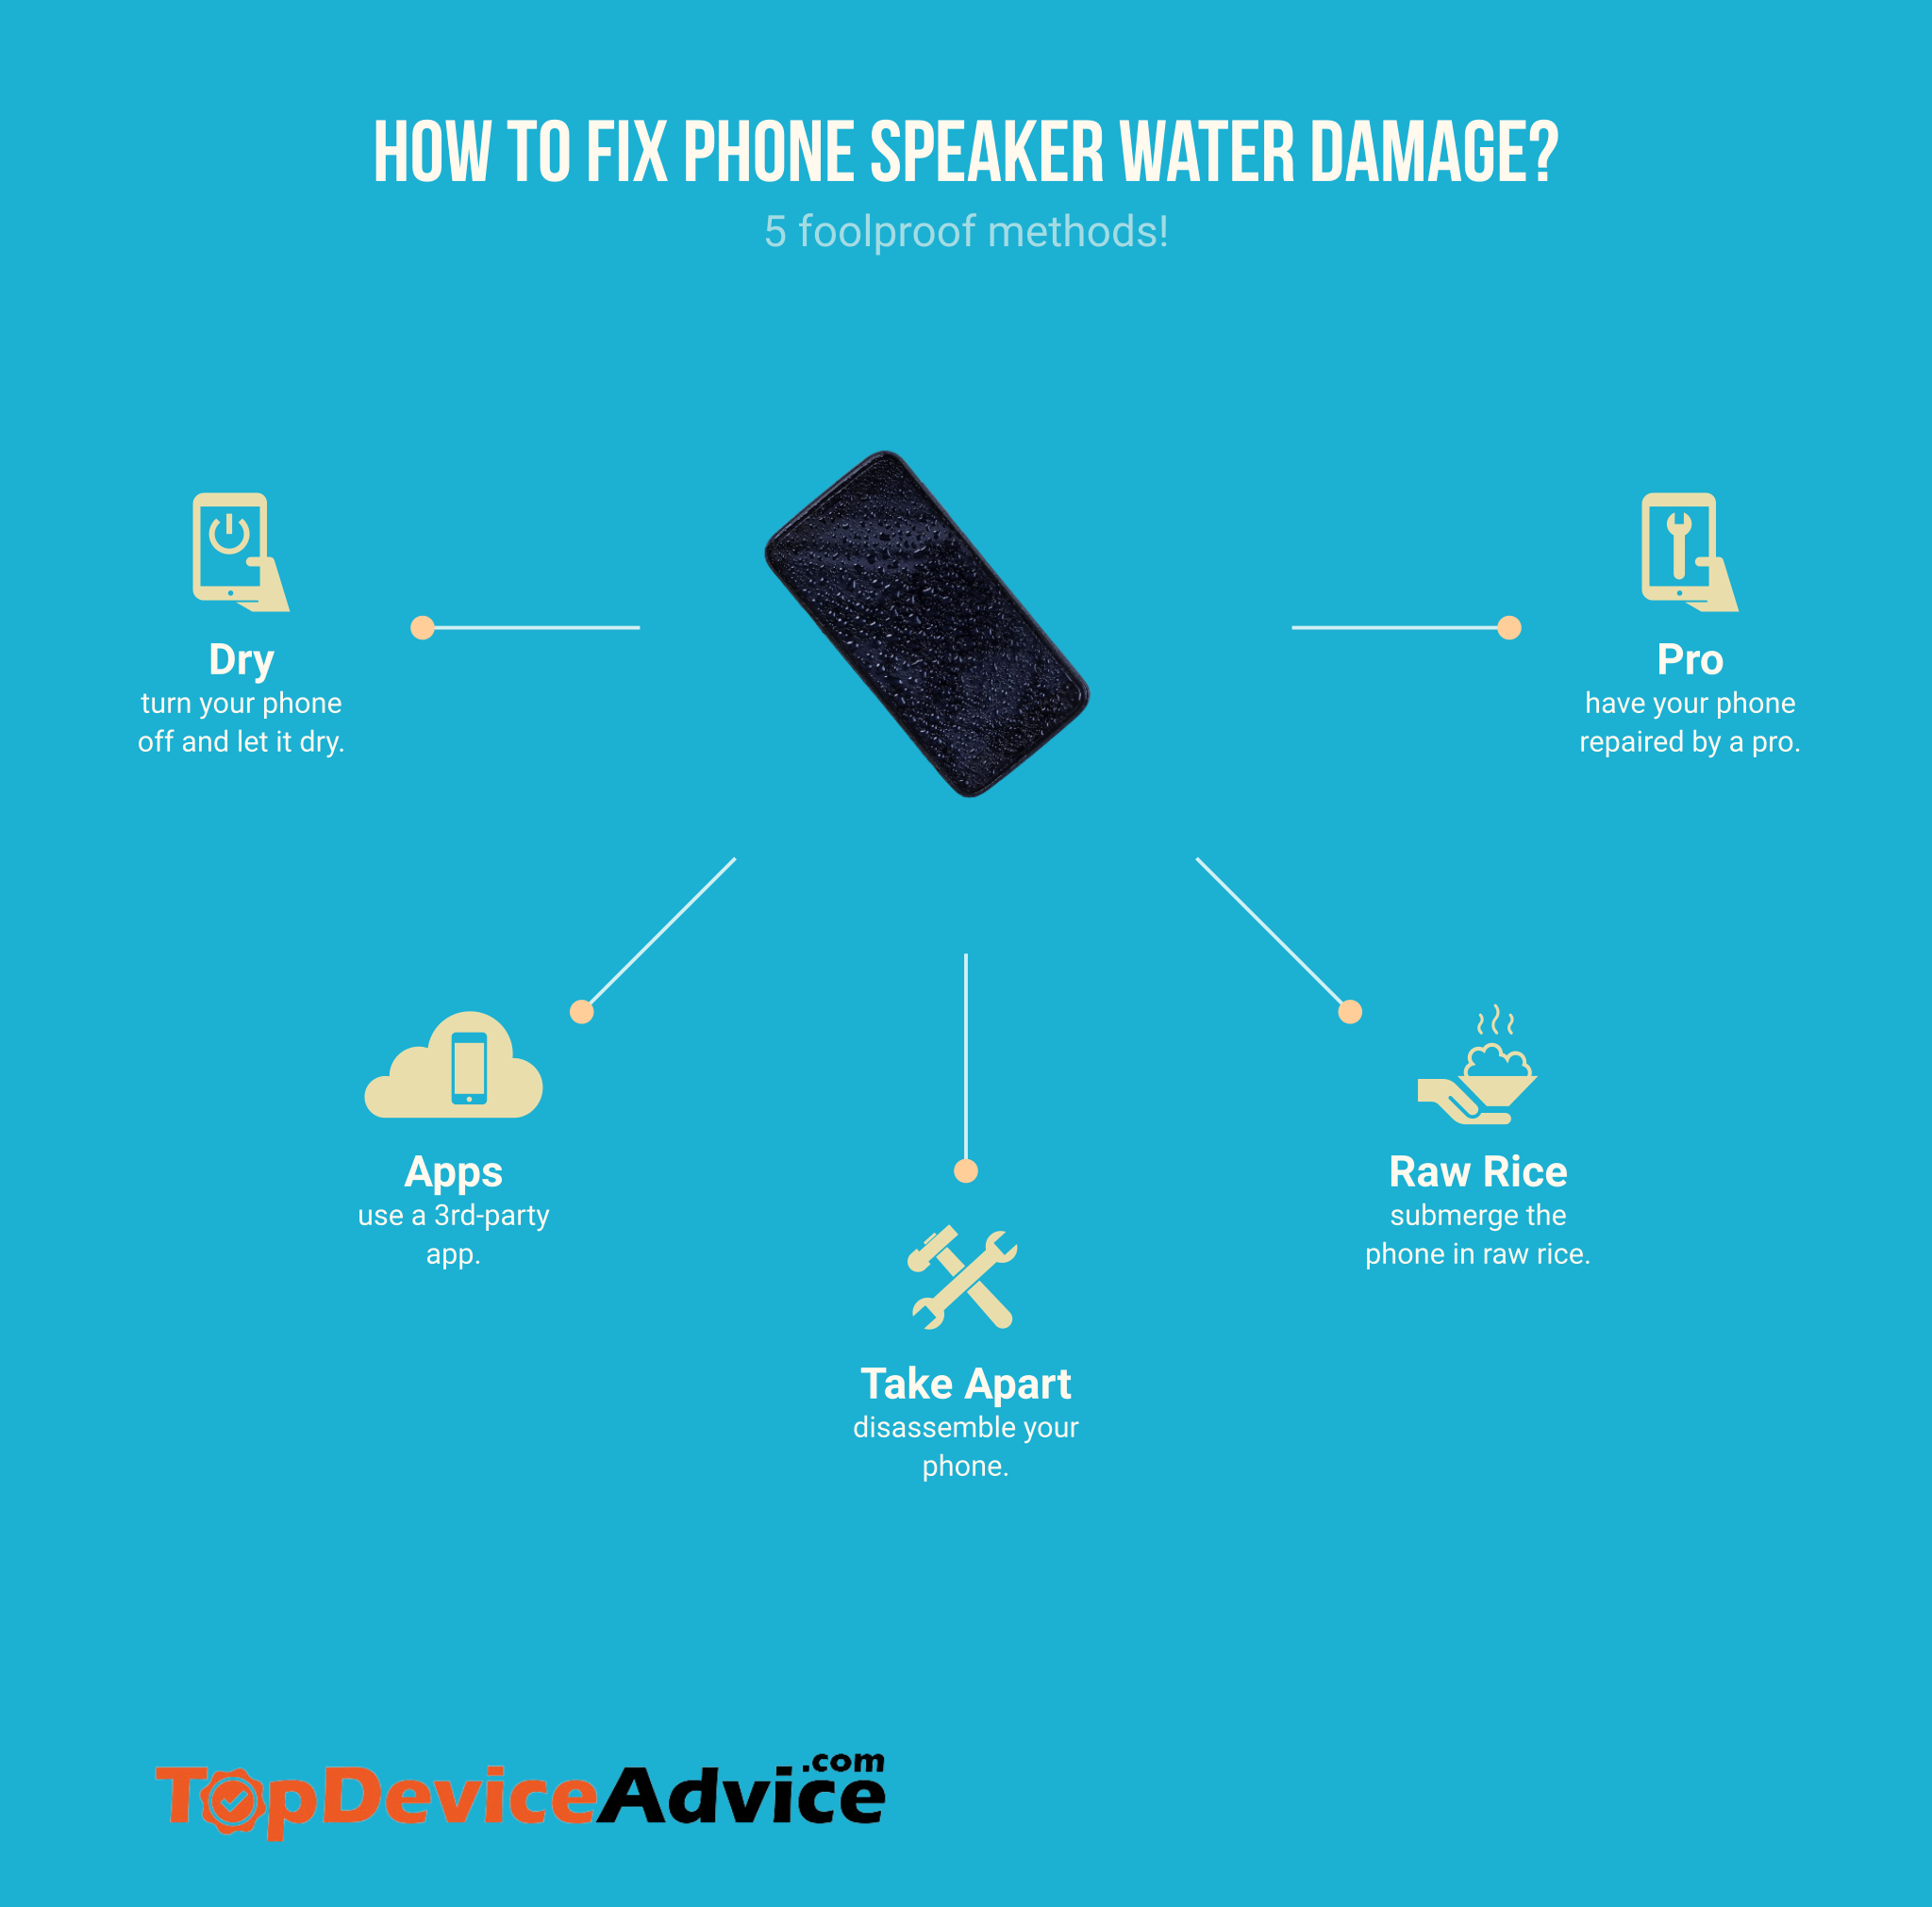 how to fix phone speaker water damage (infographic)